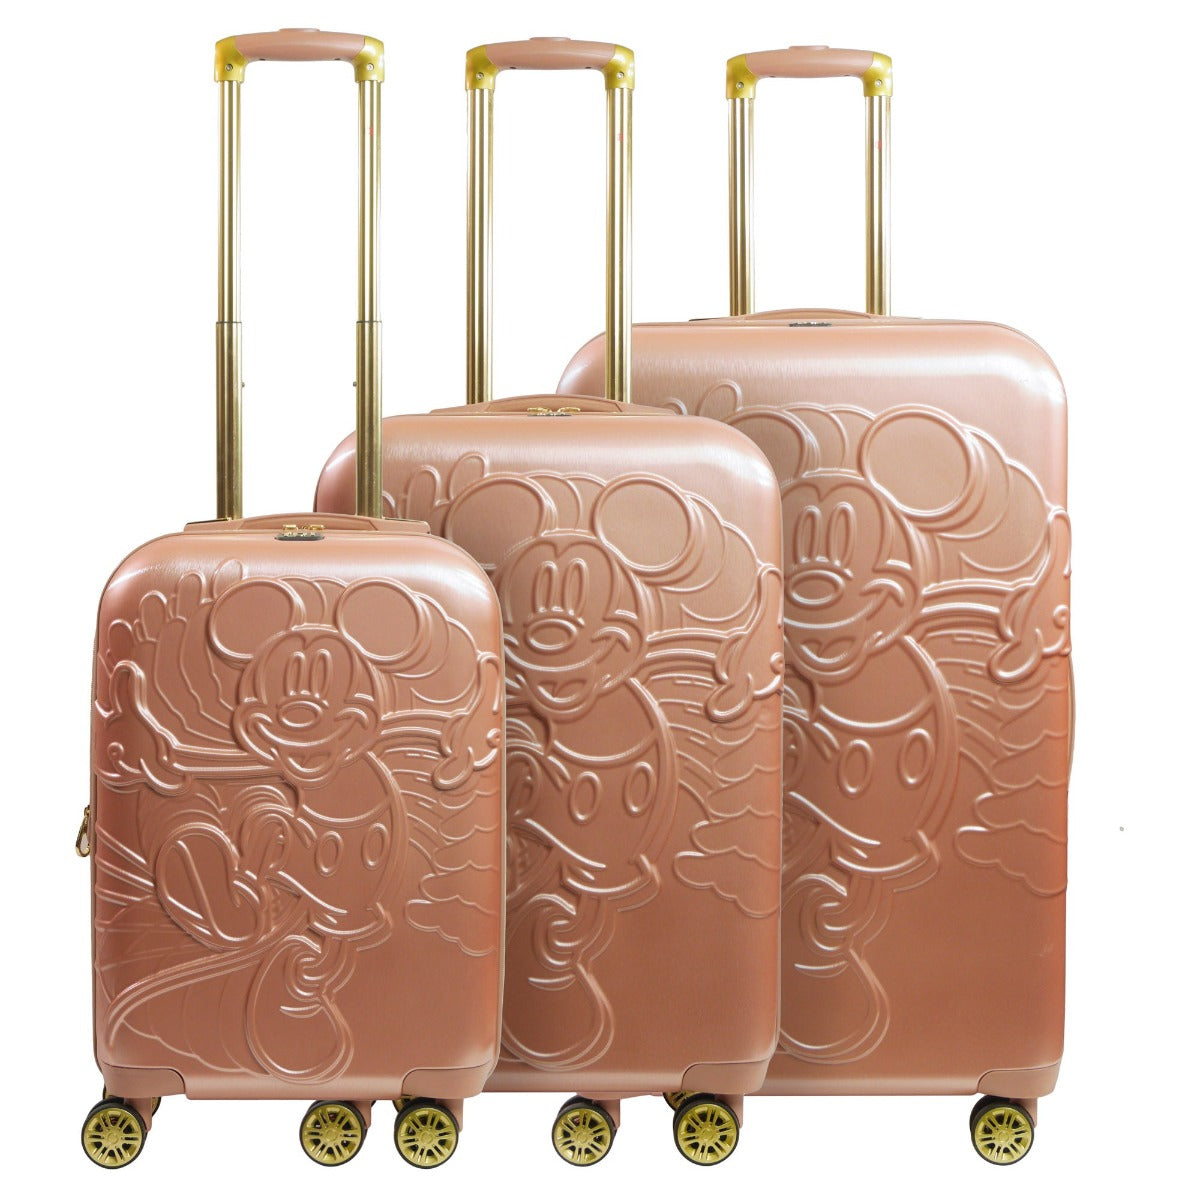 Disney Running Mickey Mouse 3 piece Luggage Hardsided Spinner Suitcase Set Rose Gold 22" 26" 30.5" compression straps interior pockets